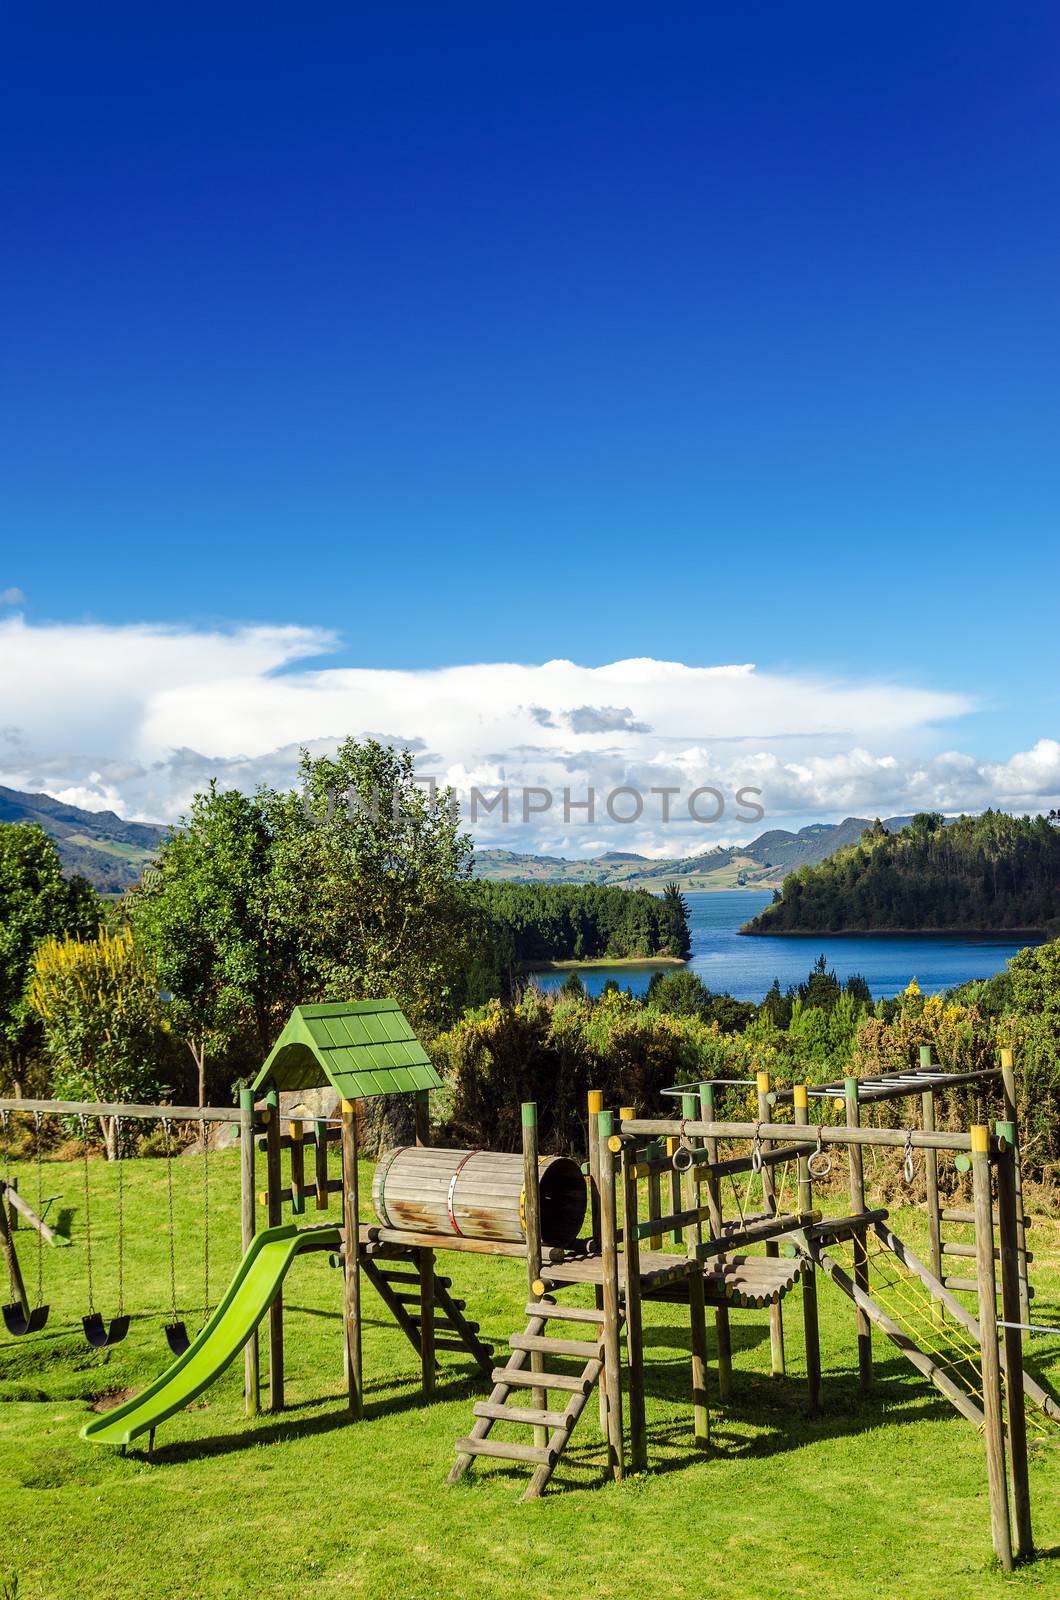 Vertical view of a playground in a natural setting with Neusa lake in the background in Cundinamarca, Colombia